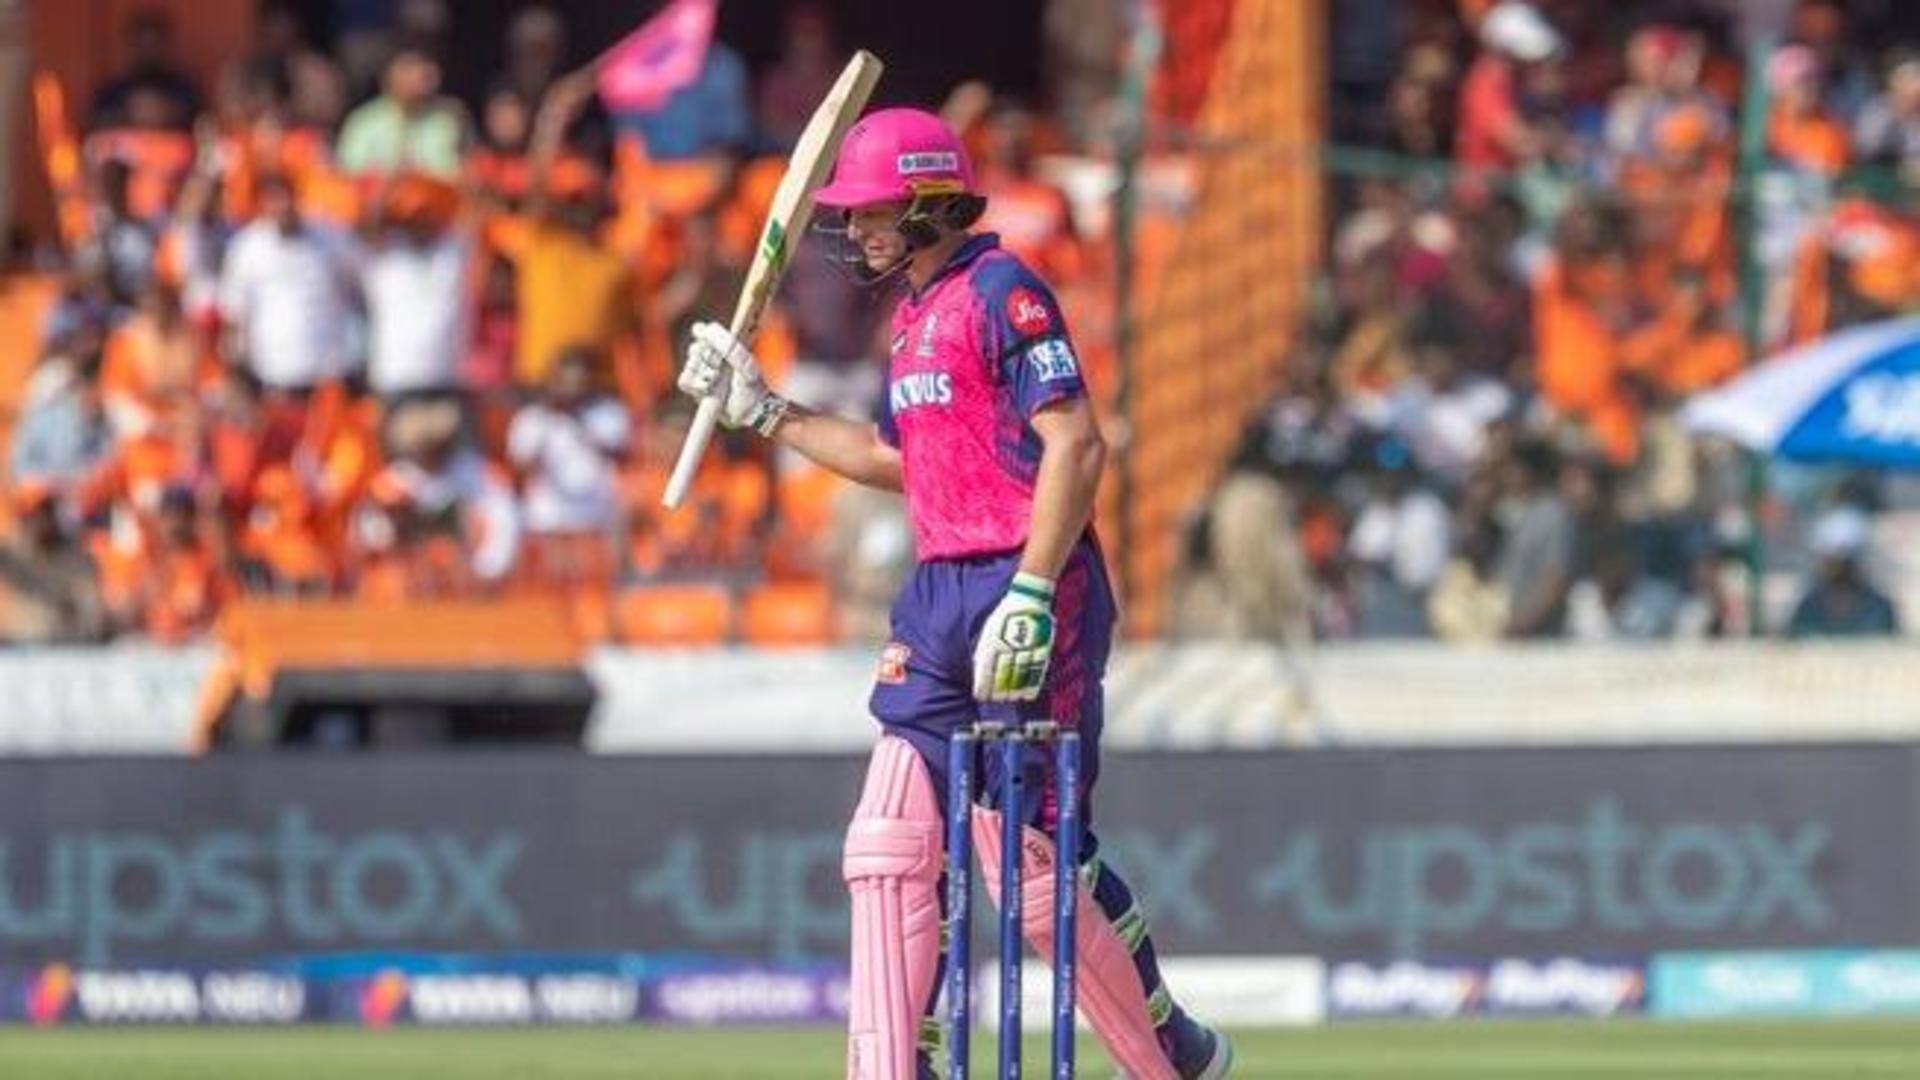 Rajasthan Royals record their highest powerplay score in IPL: Stats